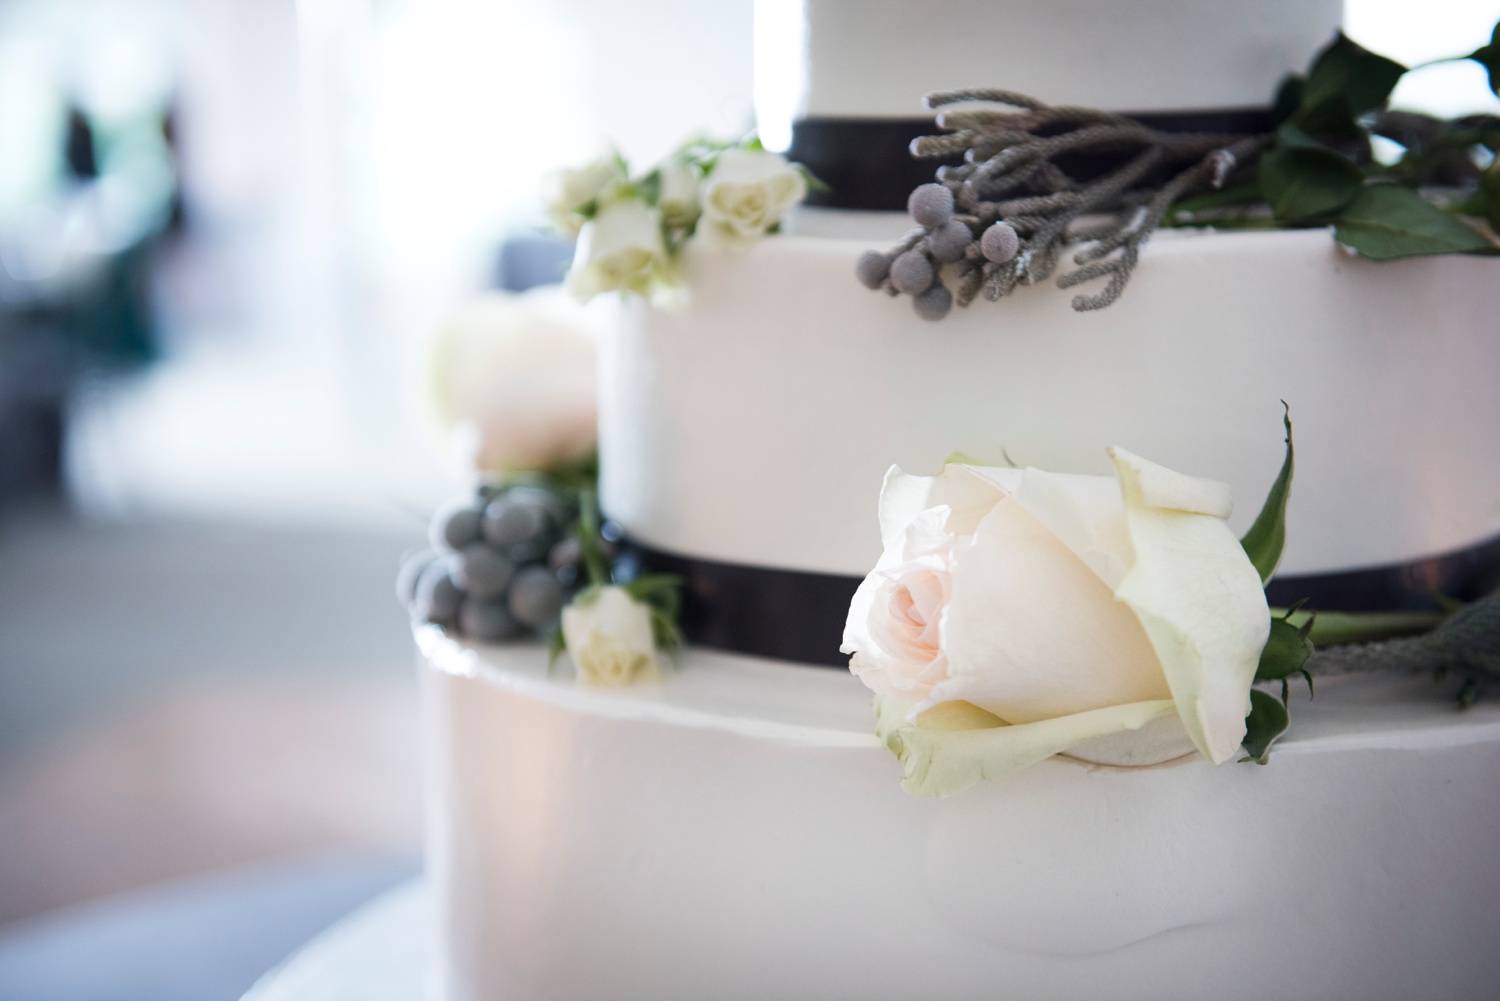 wedding cake details white roses and gray berries and ivy